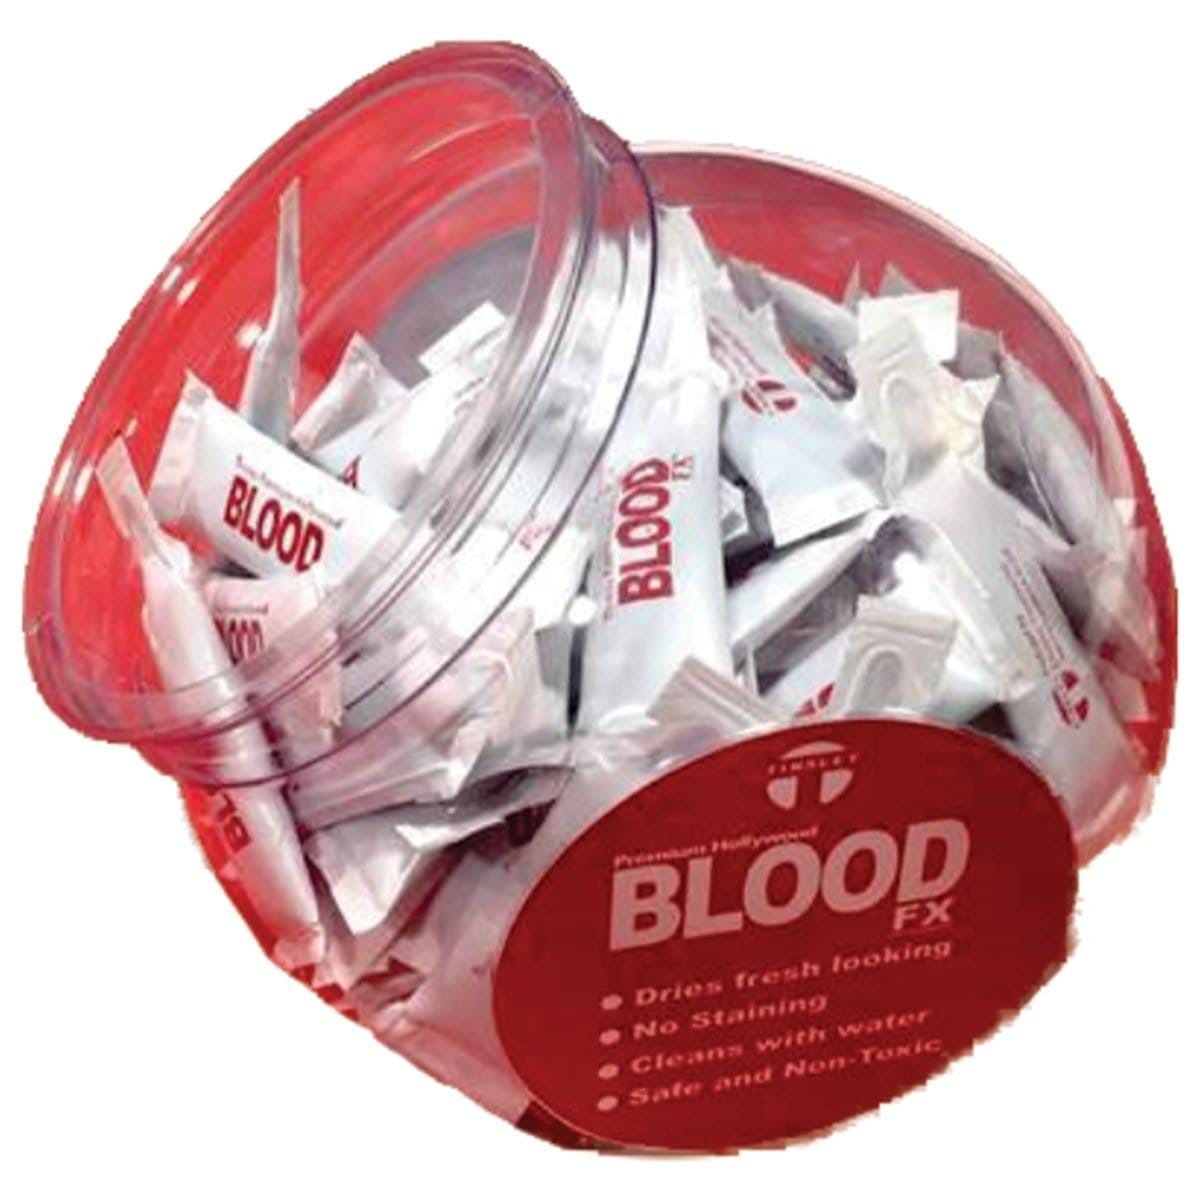 Buy Costume Accessories Fake blood capsule sold at Party Expert